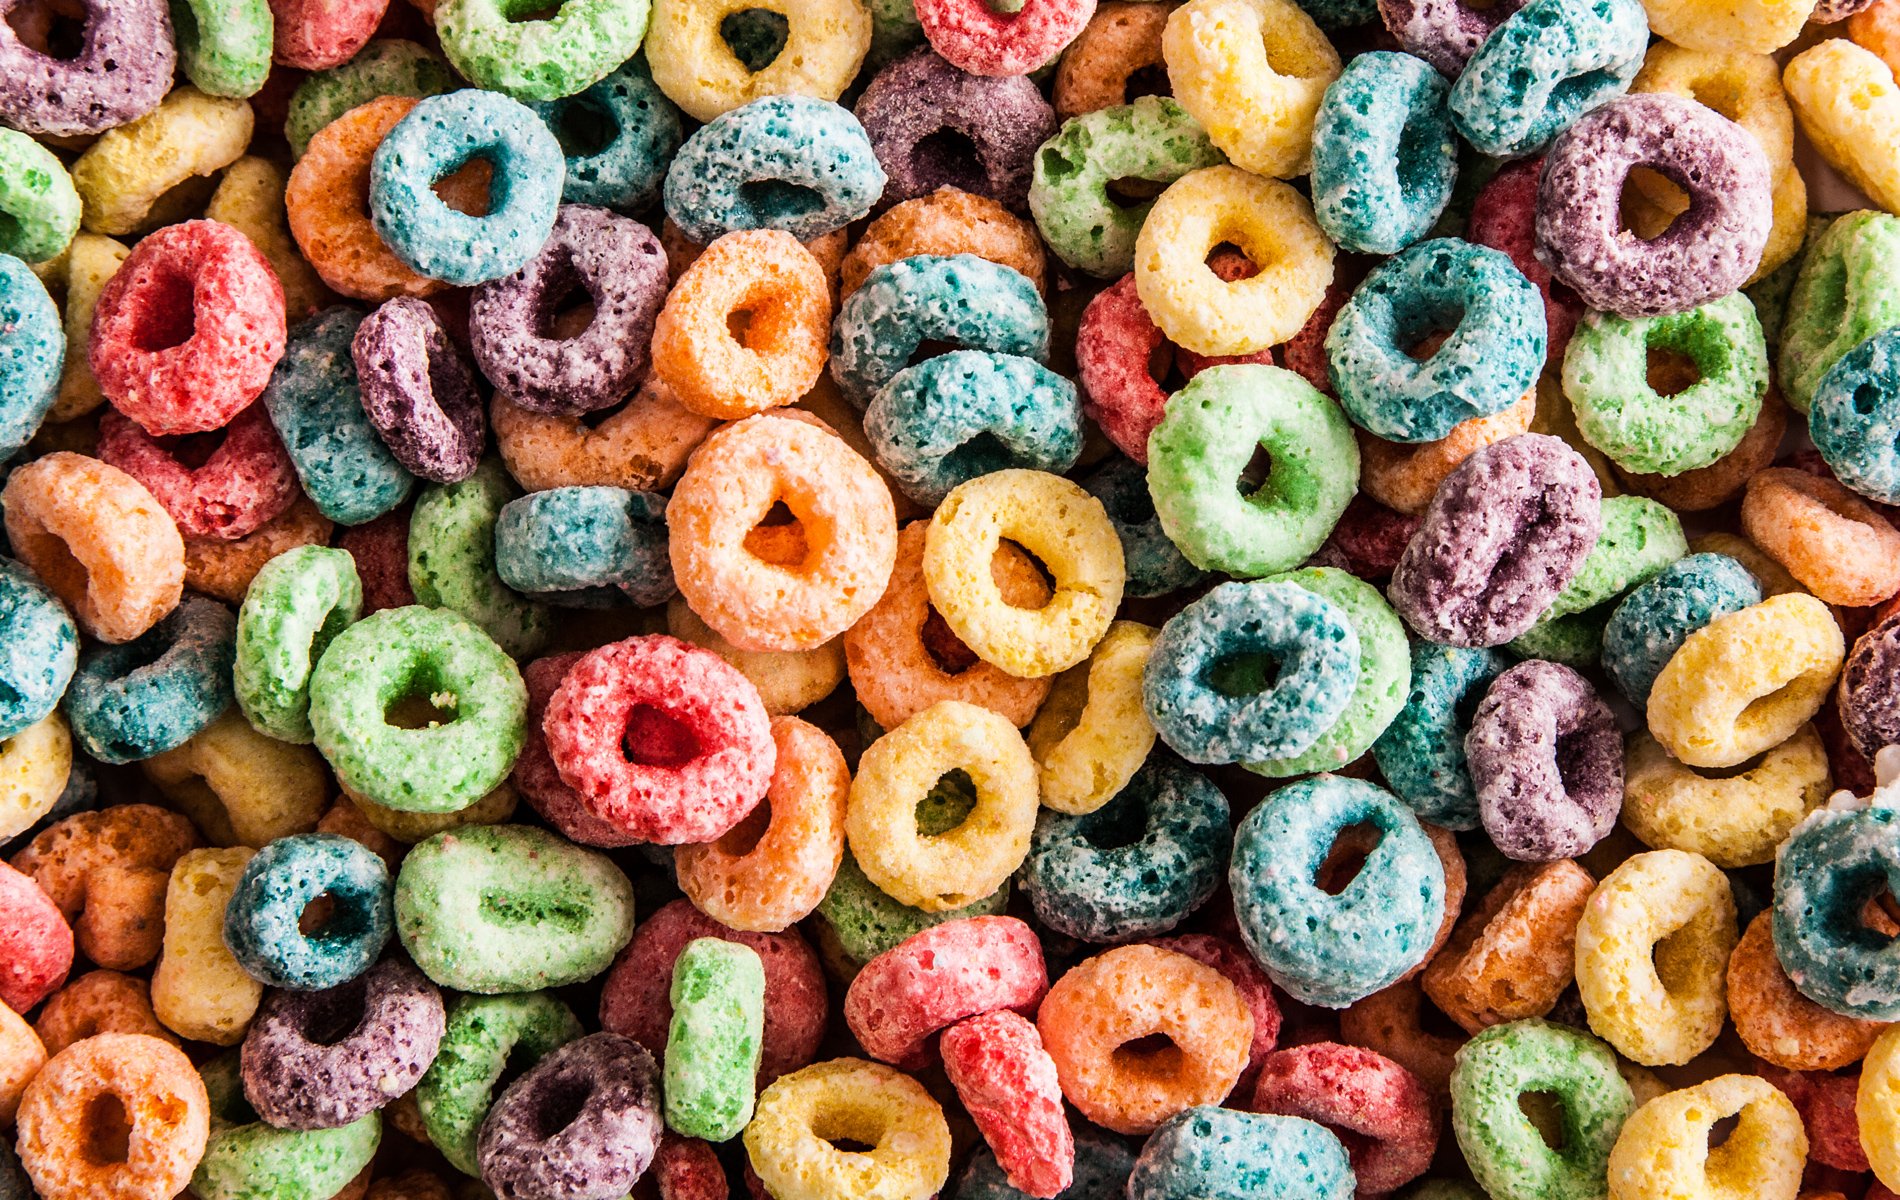  Cereal Wallpaper and Background Image 1900x1200 ID 